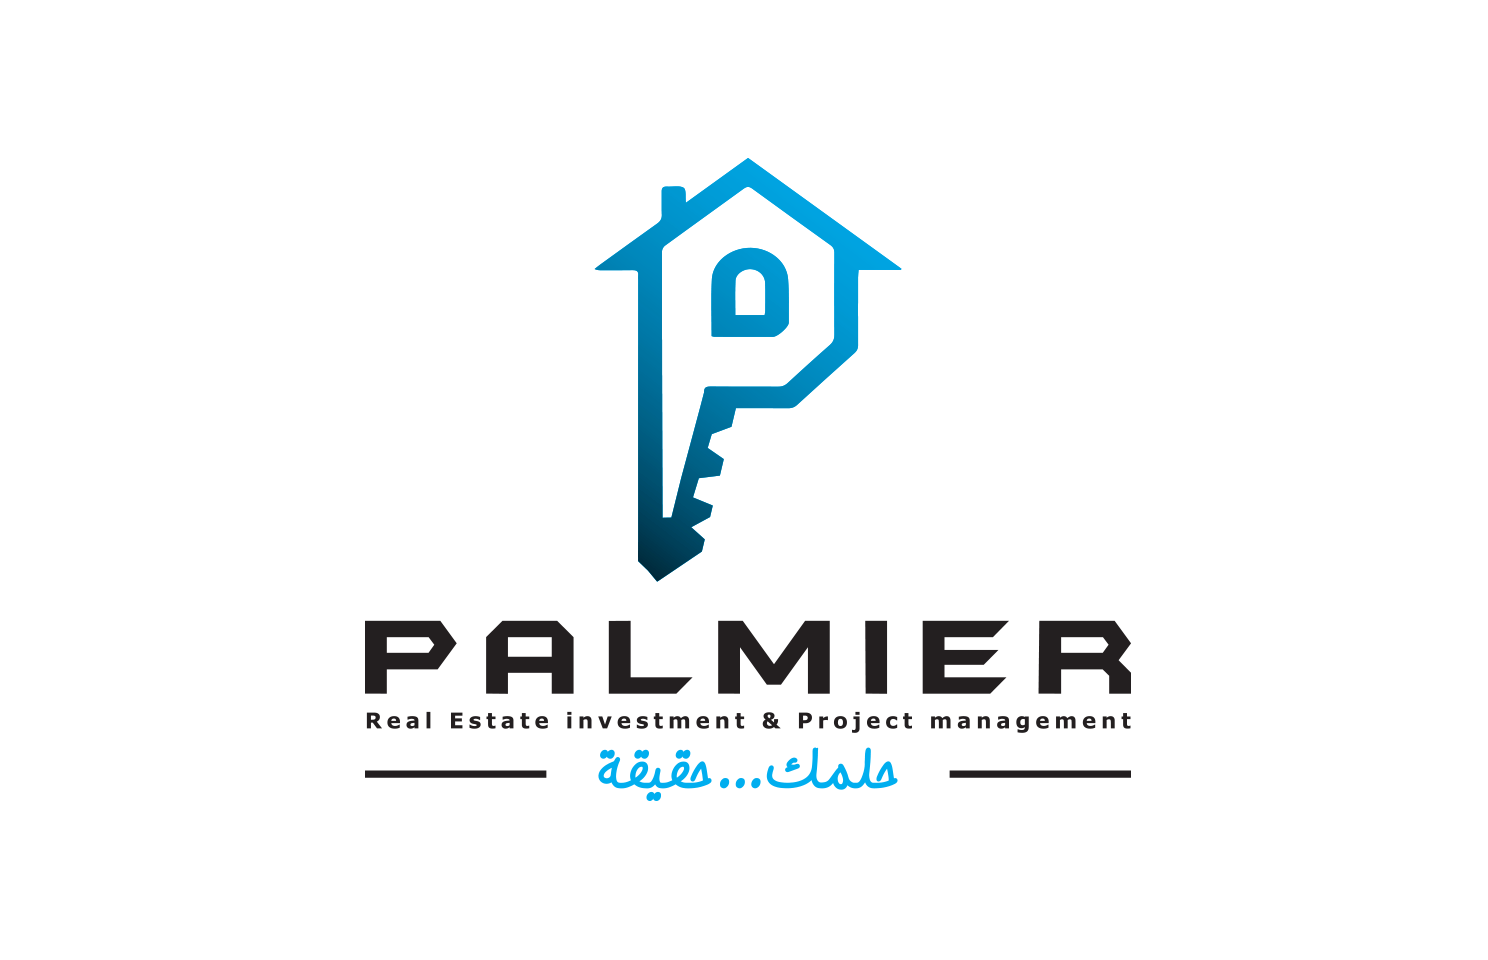 Palmier Real Estate Investment